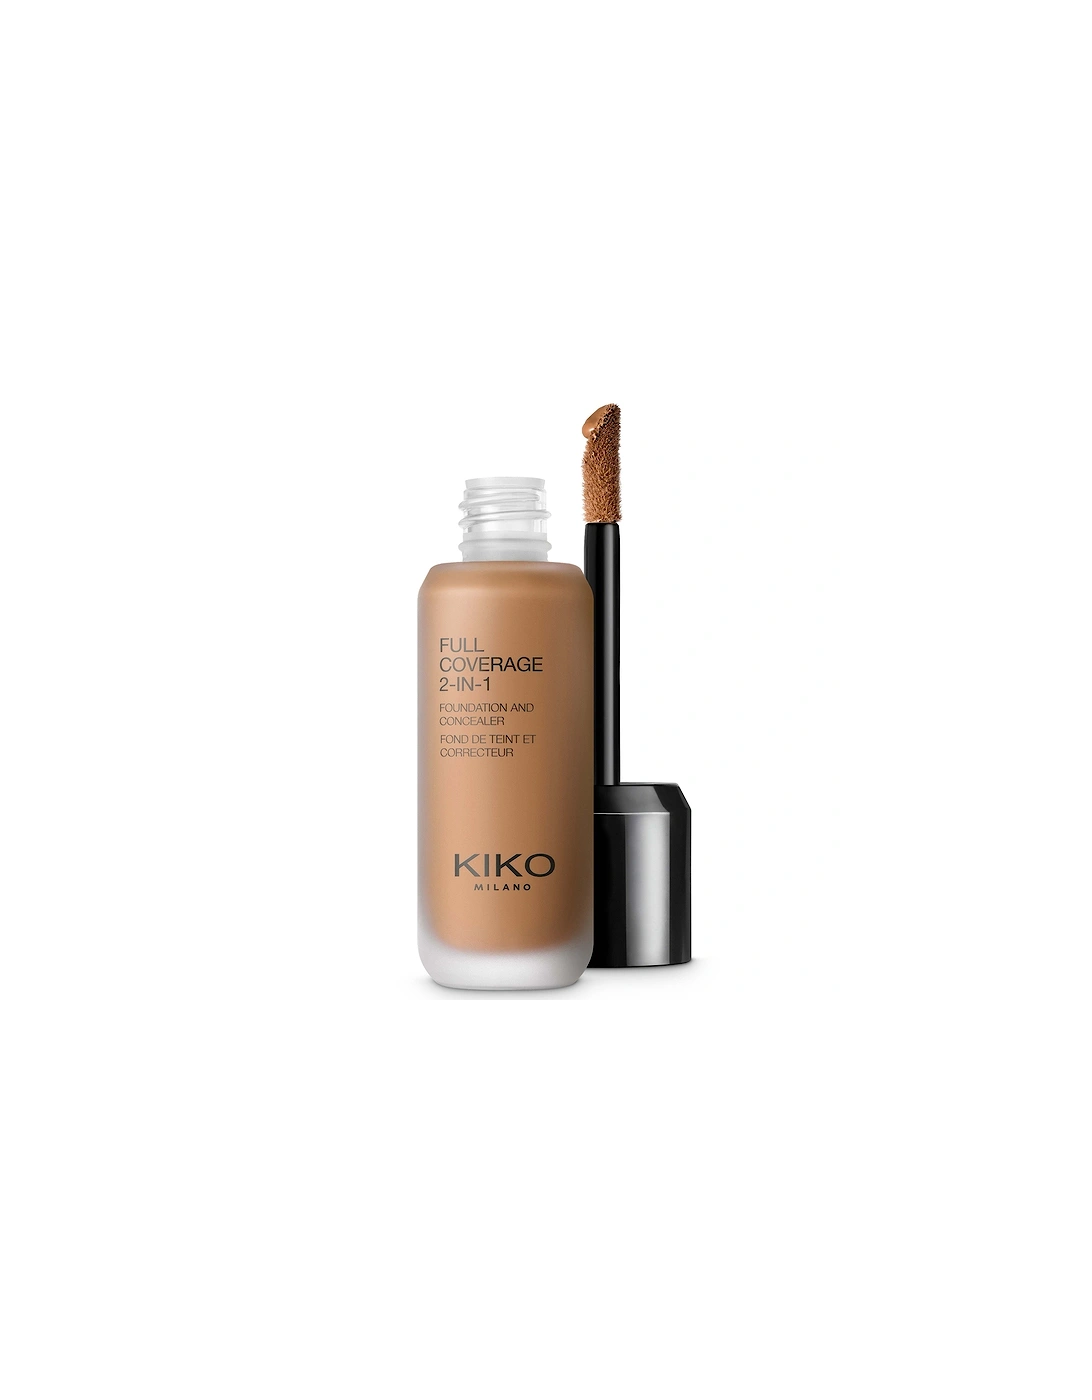 Full Coverage 2-in-1 Foundation and Concealer 25ml - 120 Neutral, 2 of 1